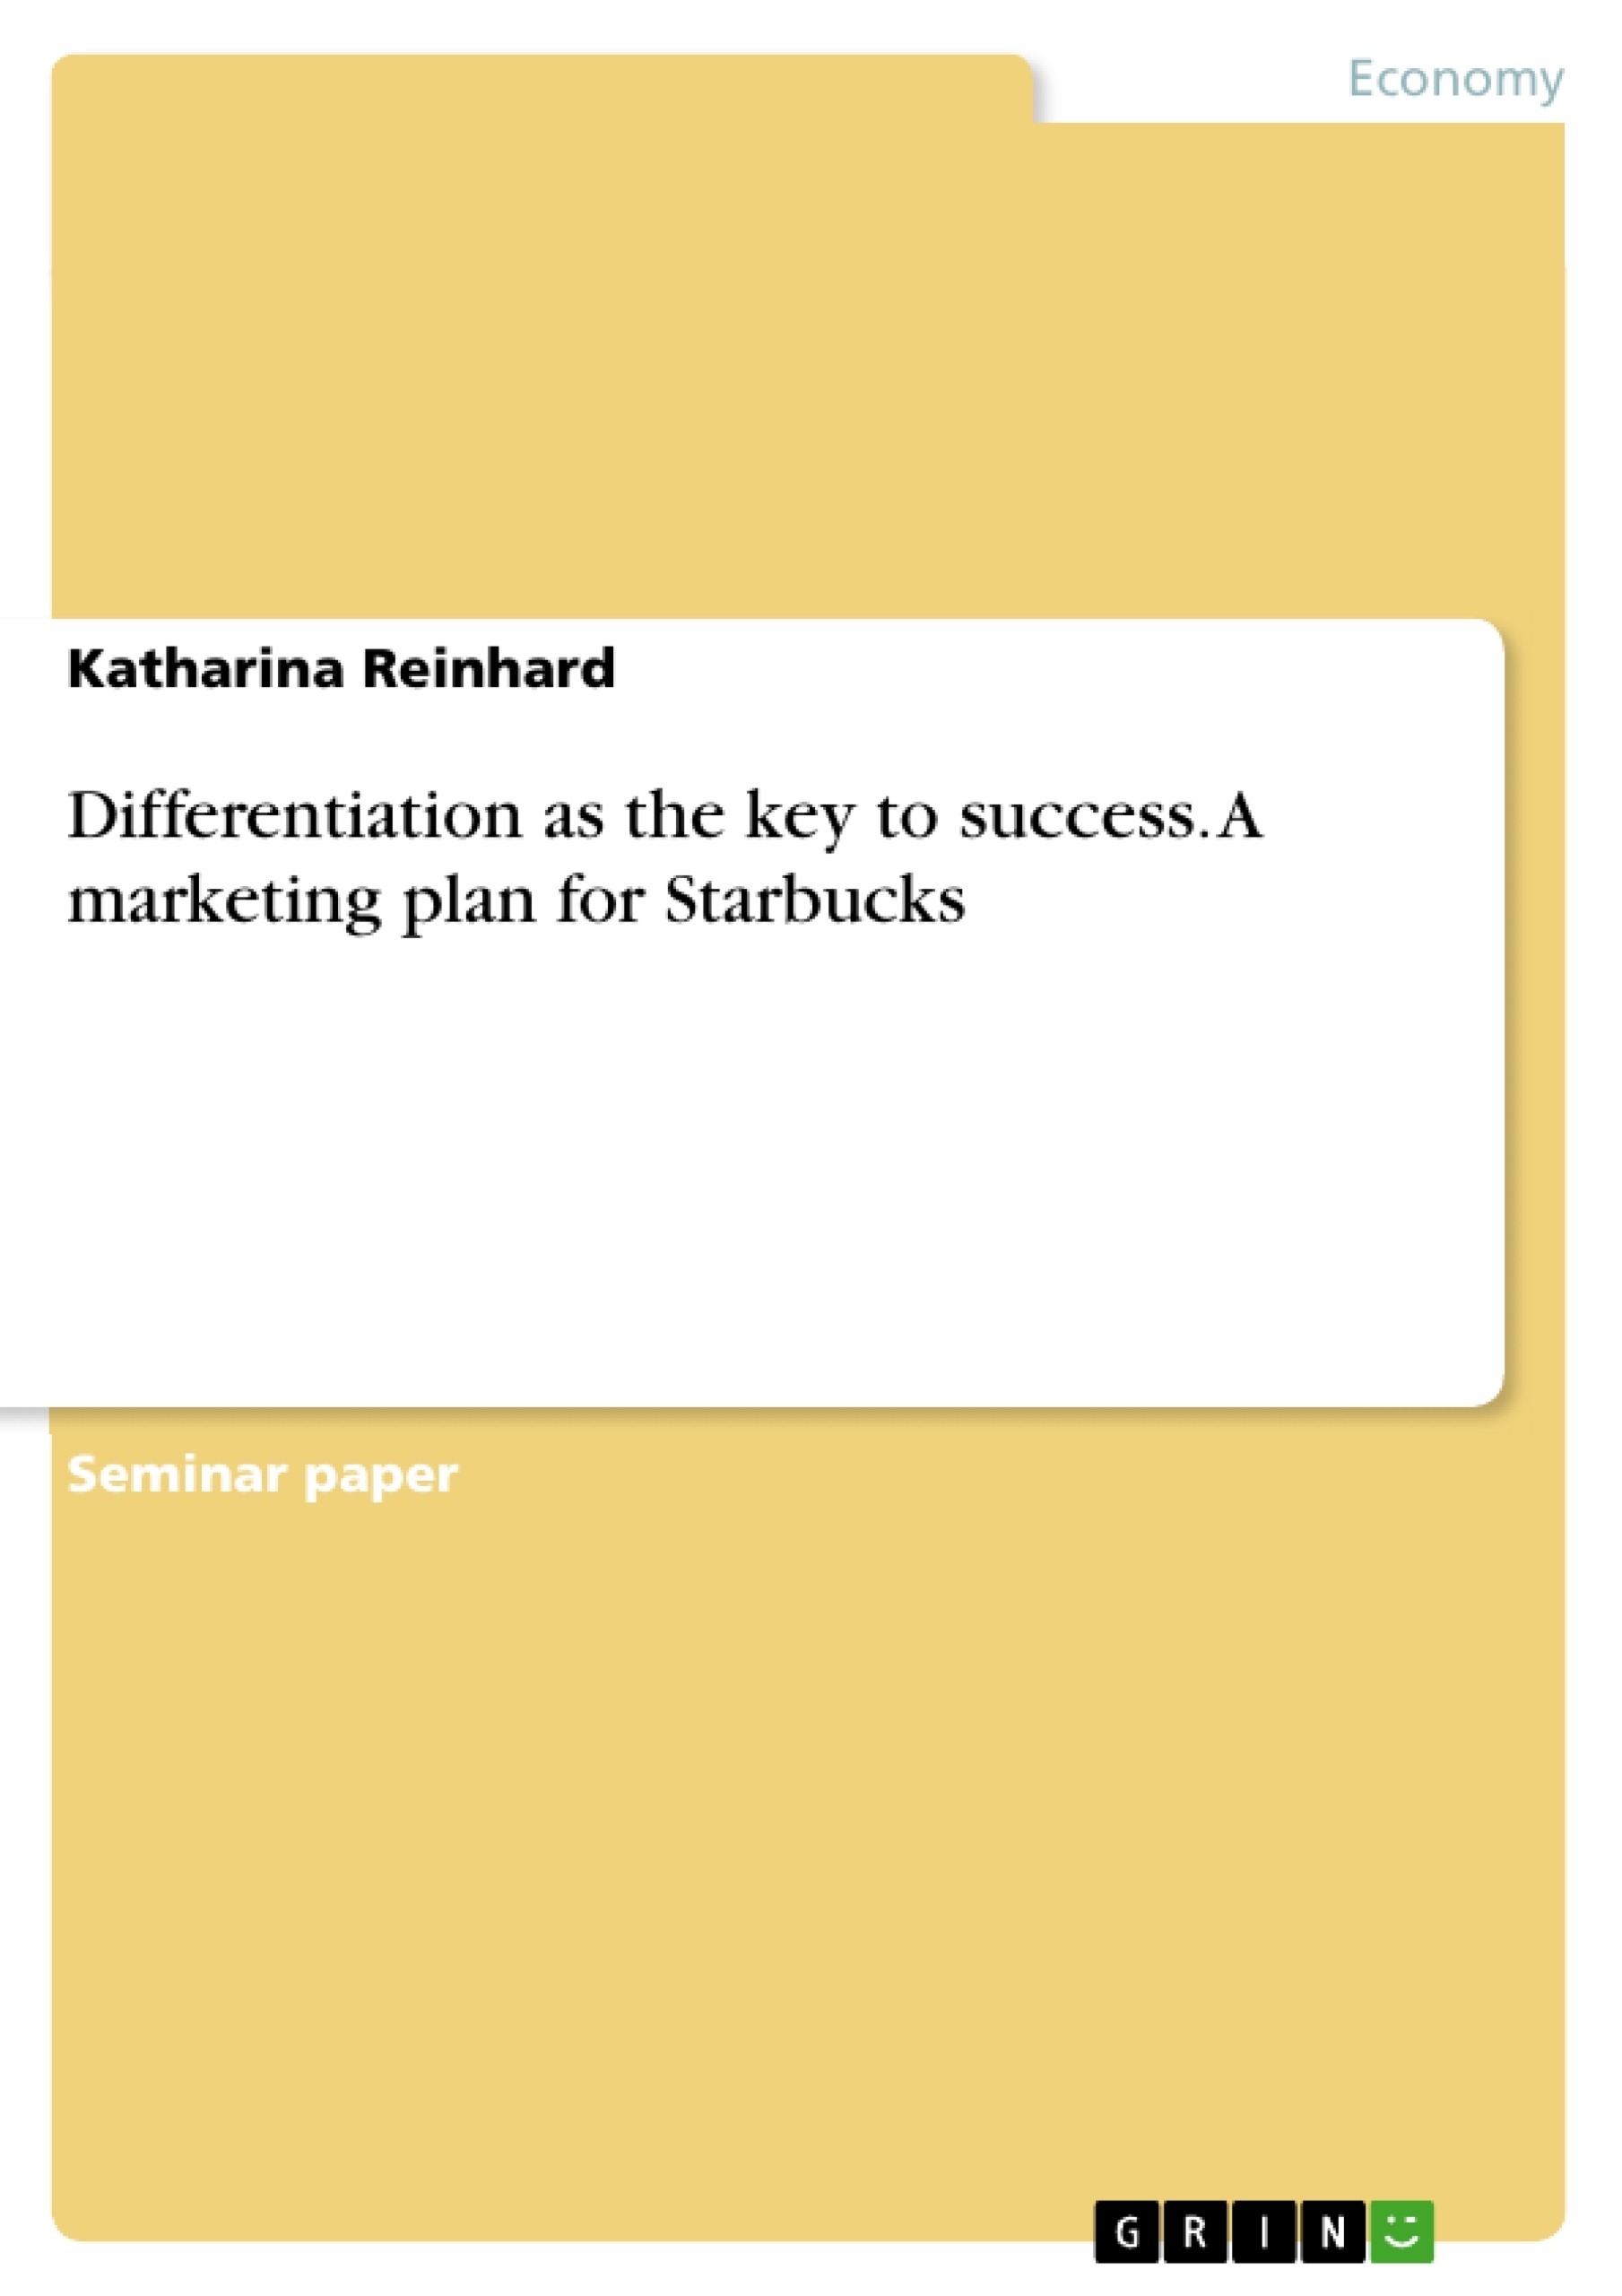 Title: Differentiation as the key to success. A marketing plan for Starbucks